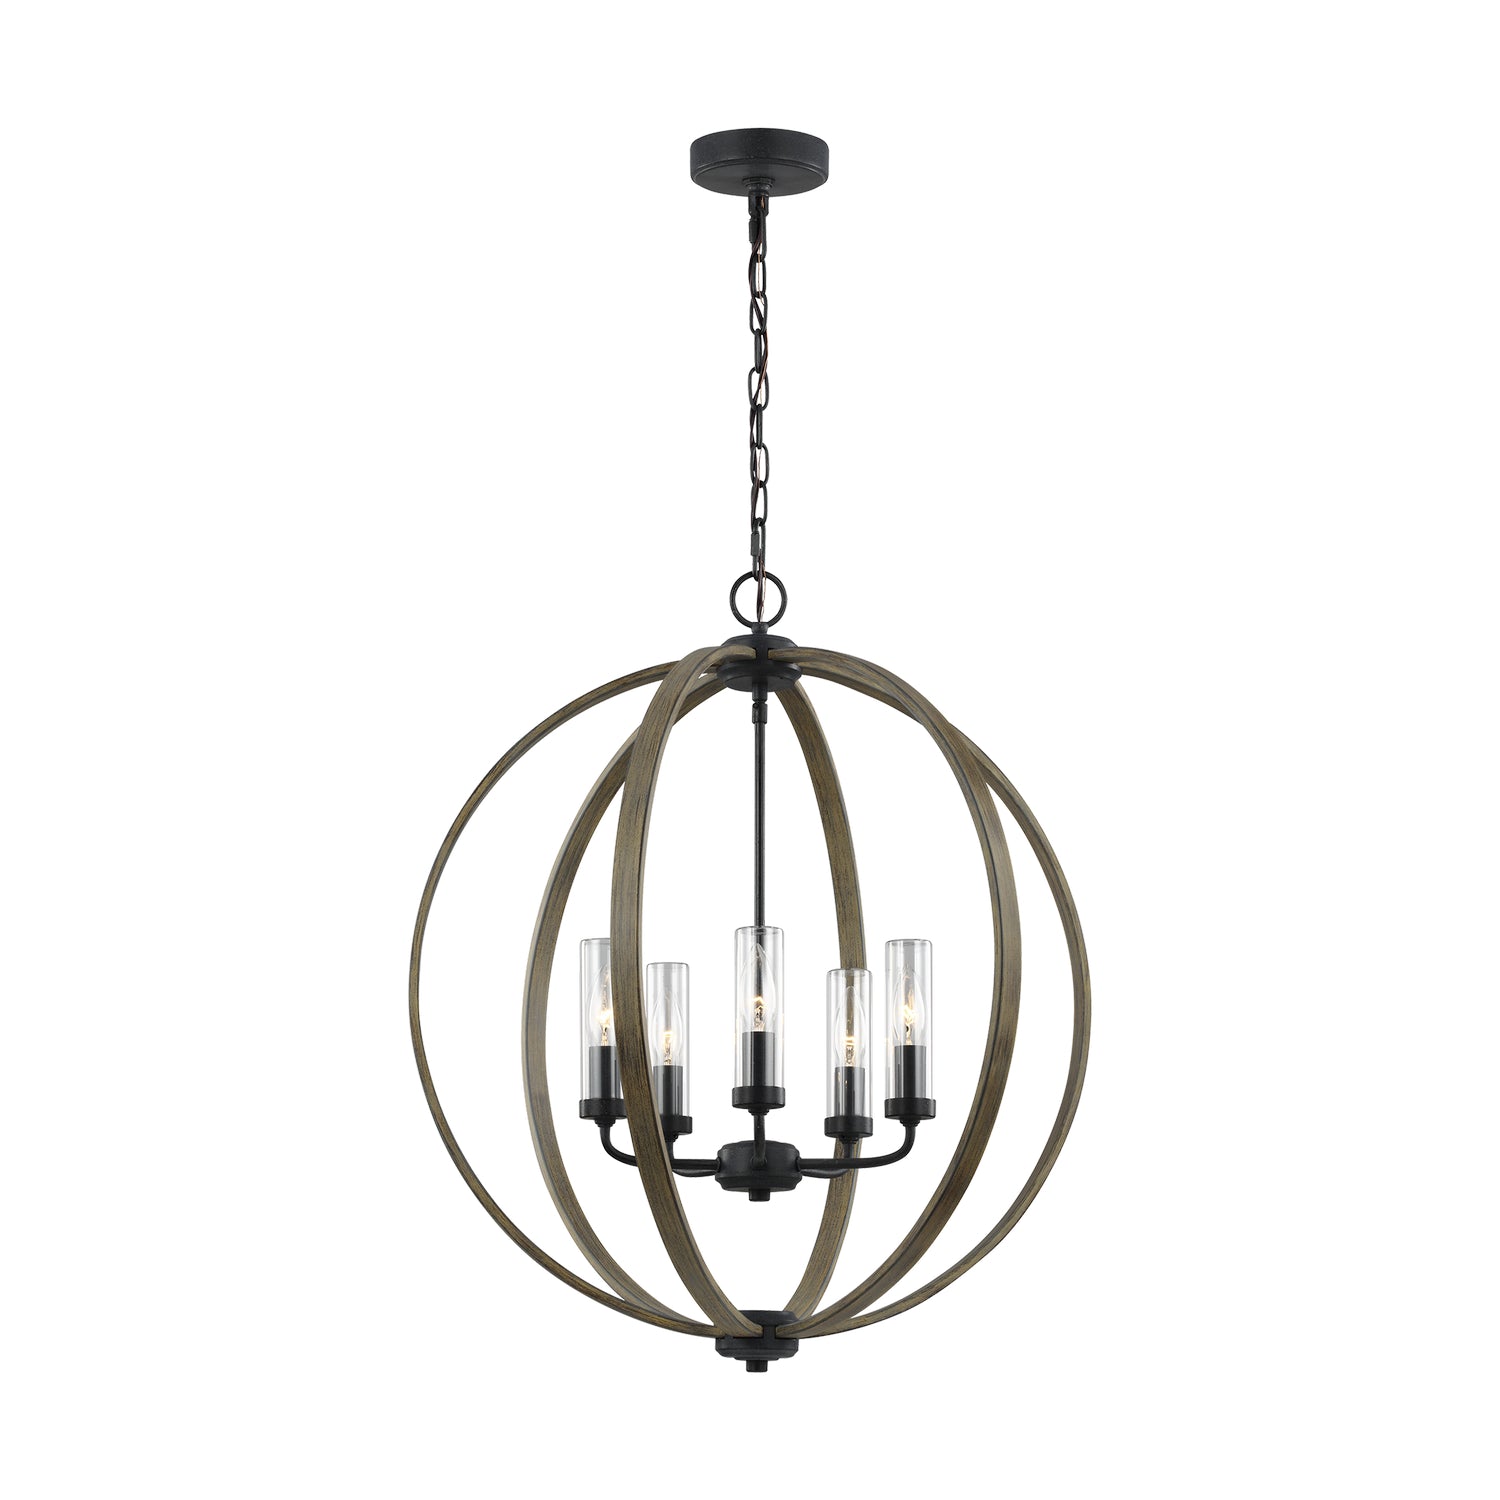 Visual Comfort Studio Canada - OLF3294/5WOW/AF - Five Light Outdoor Chandelier - Allier - Weathered Oak Wood / Antique Forged Iron